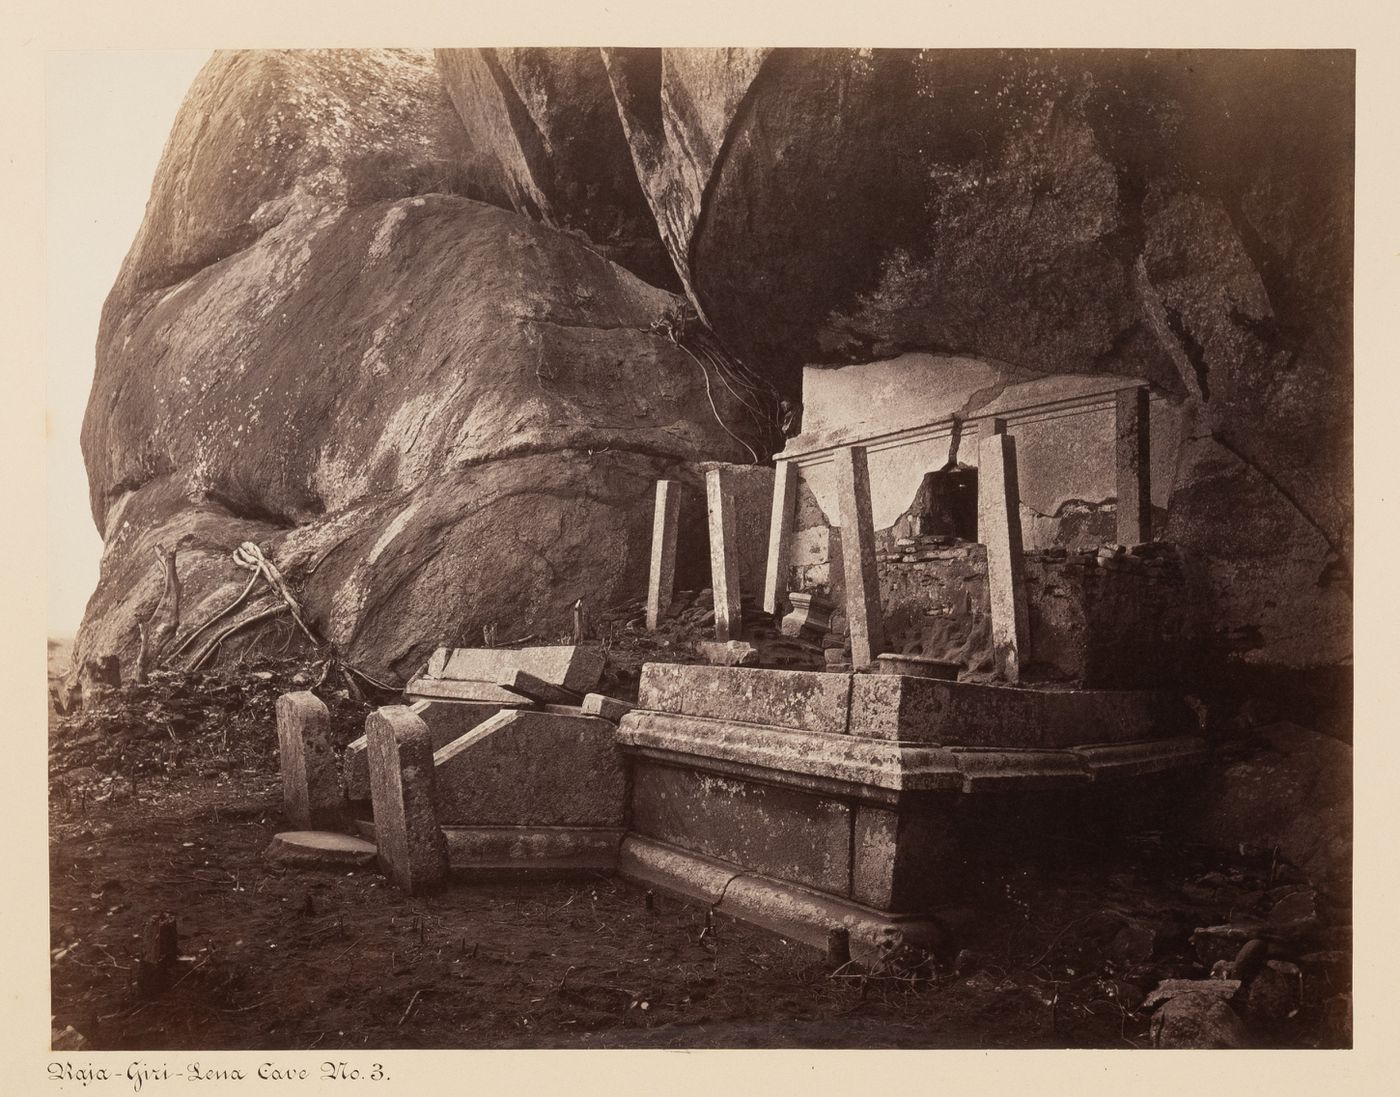 View of the ruins of a cave temple [?], possibly known as Cave No. 3, Raja-Giri-Lena (also known as Raja-Giri-Lena-Kande and Care Mountain), Mihintale, Ceylon (now Sri Lanka)